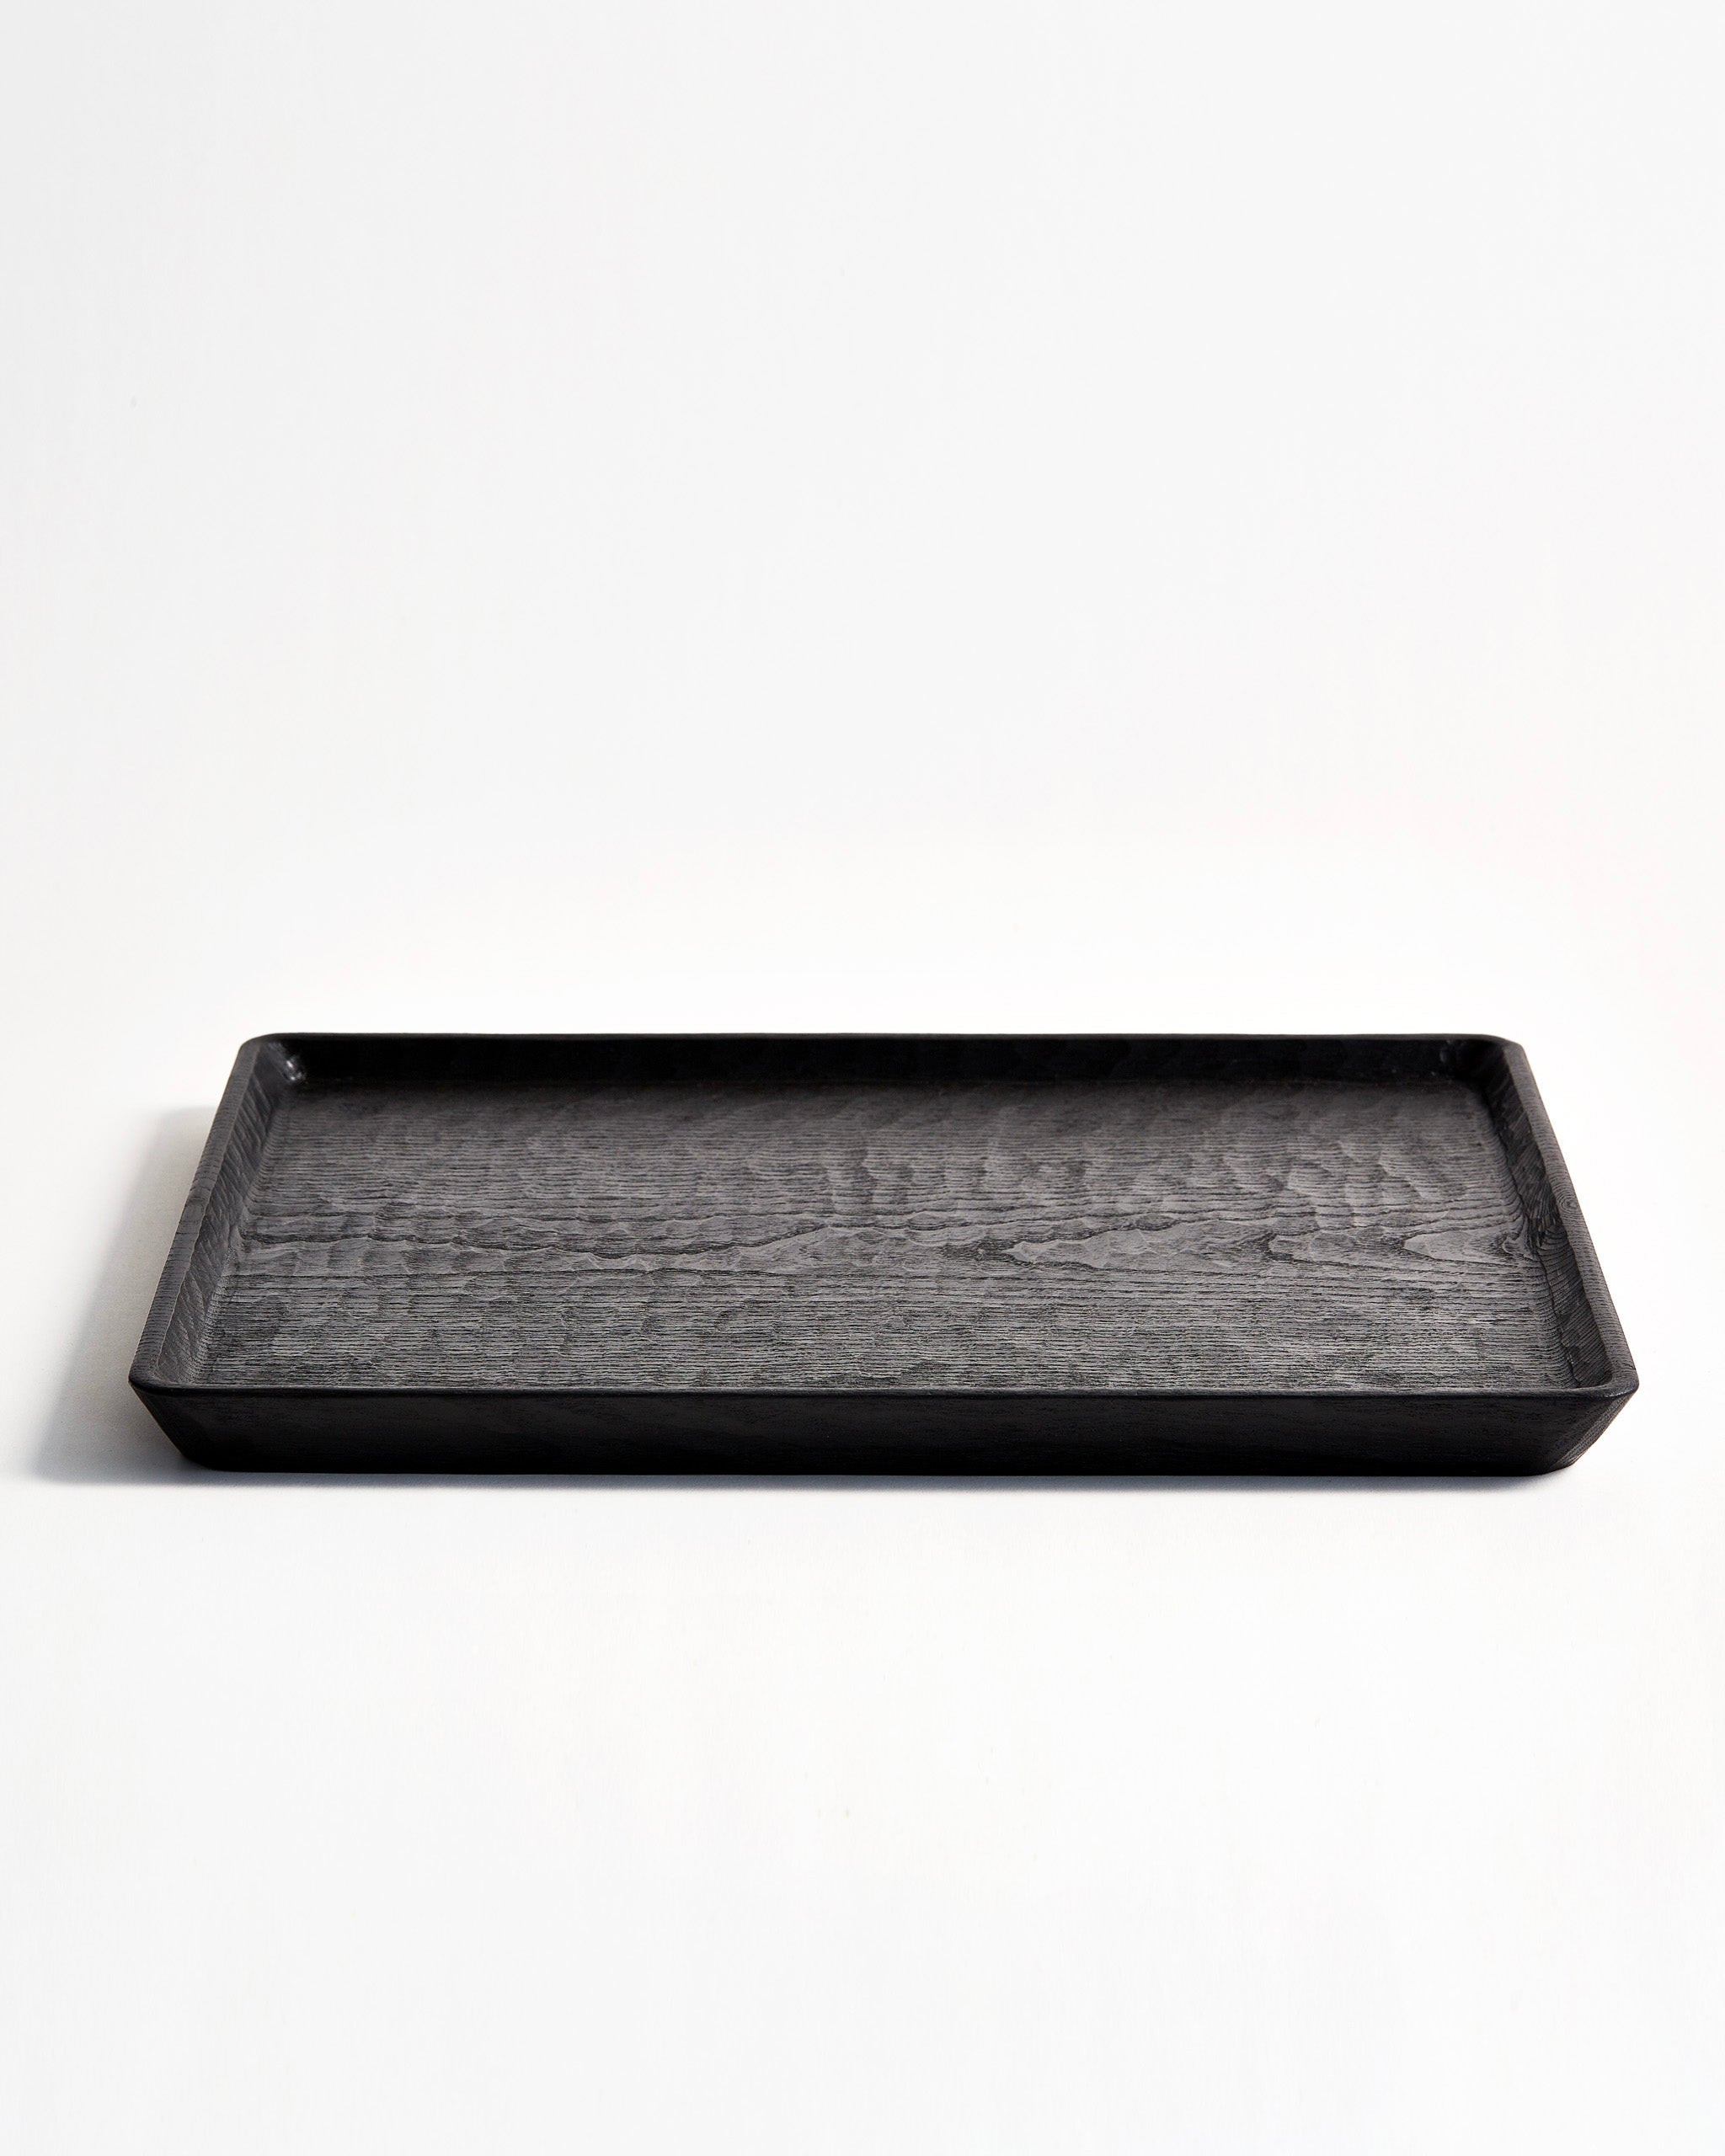 Front view of Carved Noir Wood Tray with Enju Wood by Ryuji Mitani against white-gray background.